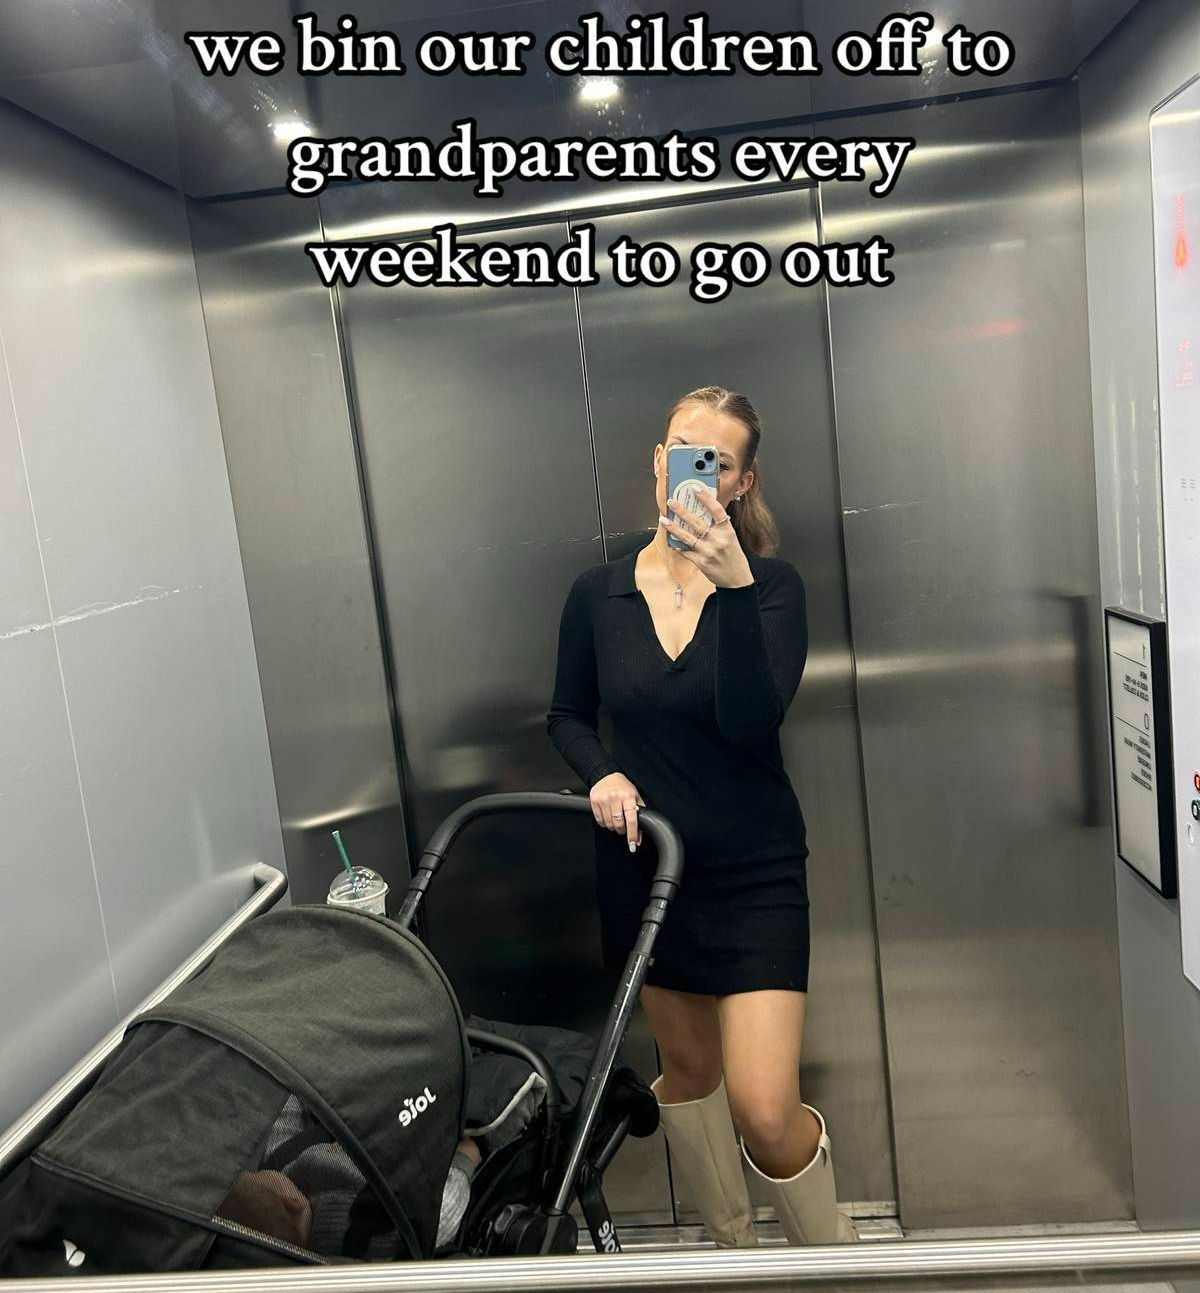 She claimed that people often assume that she 'bins' her son with his grandparents to go out 'every weekend'